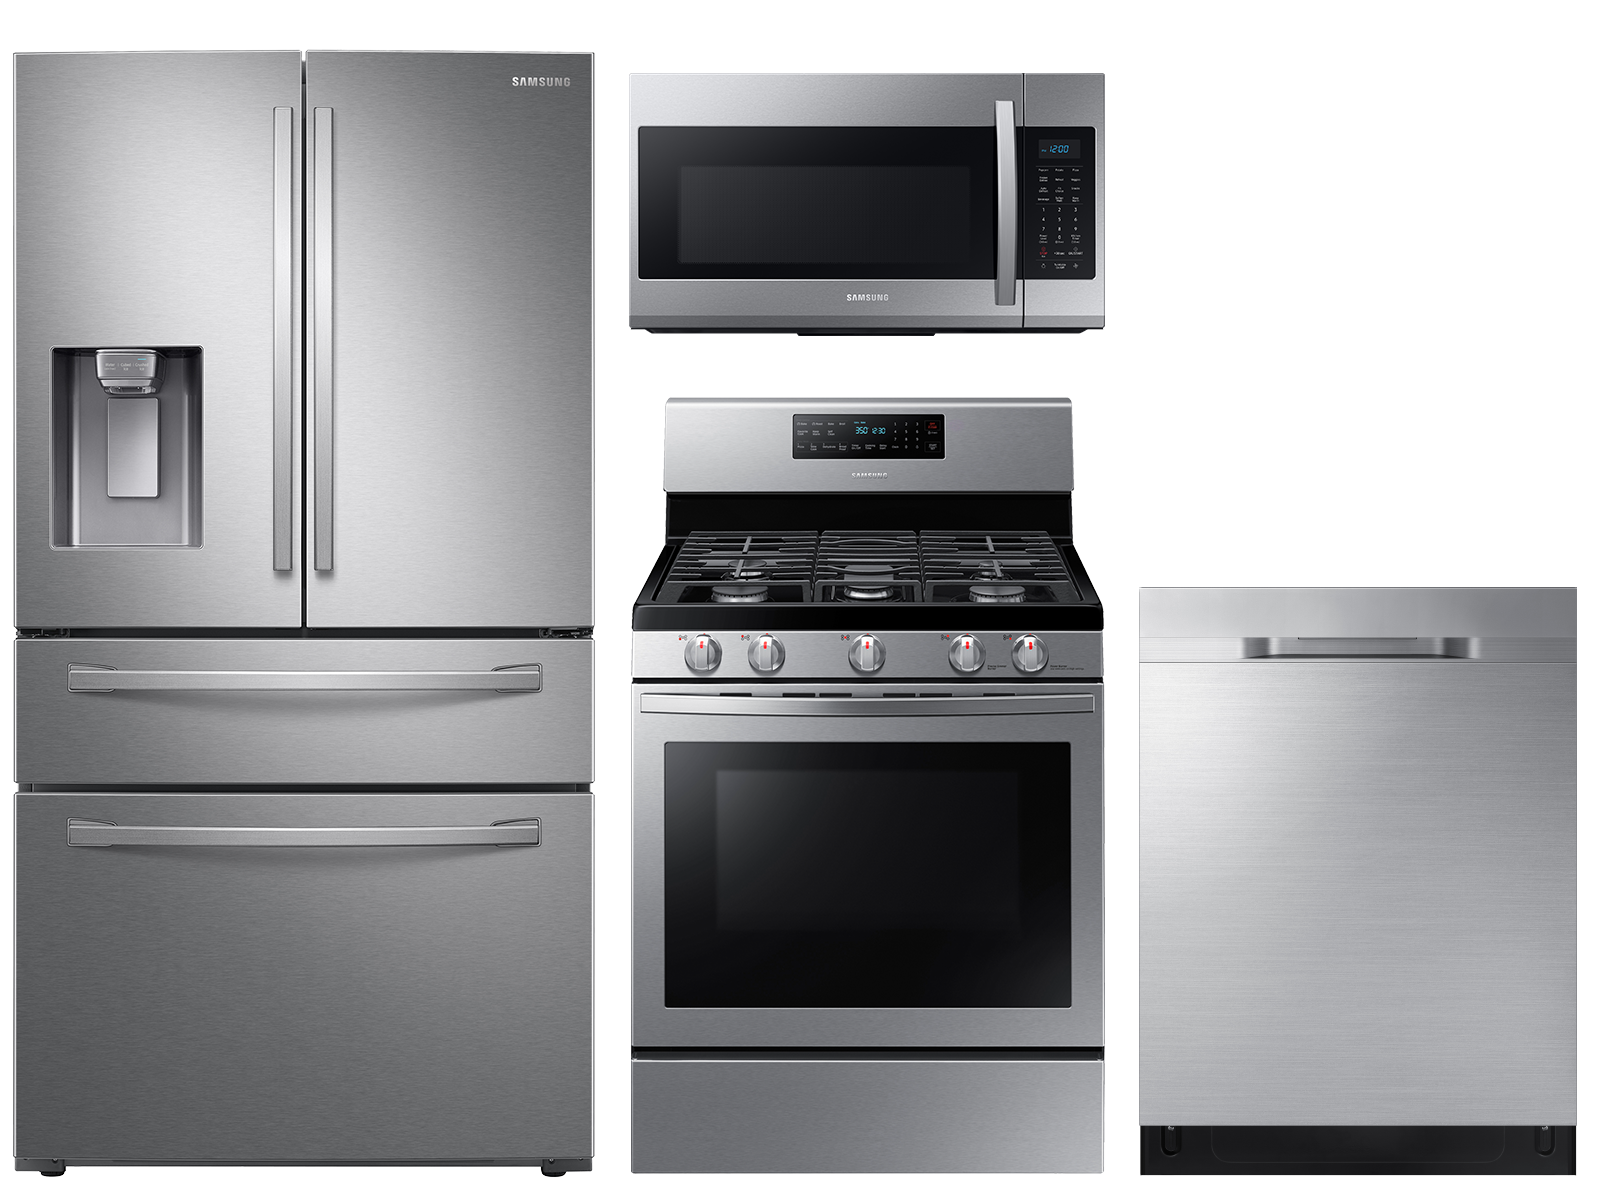 Large Capacity 4-door Refrigerator + Gas Range with Convection + StormWash™ Dishwasher + Microwave in Stainless Steel